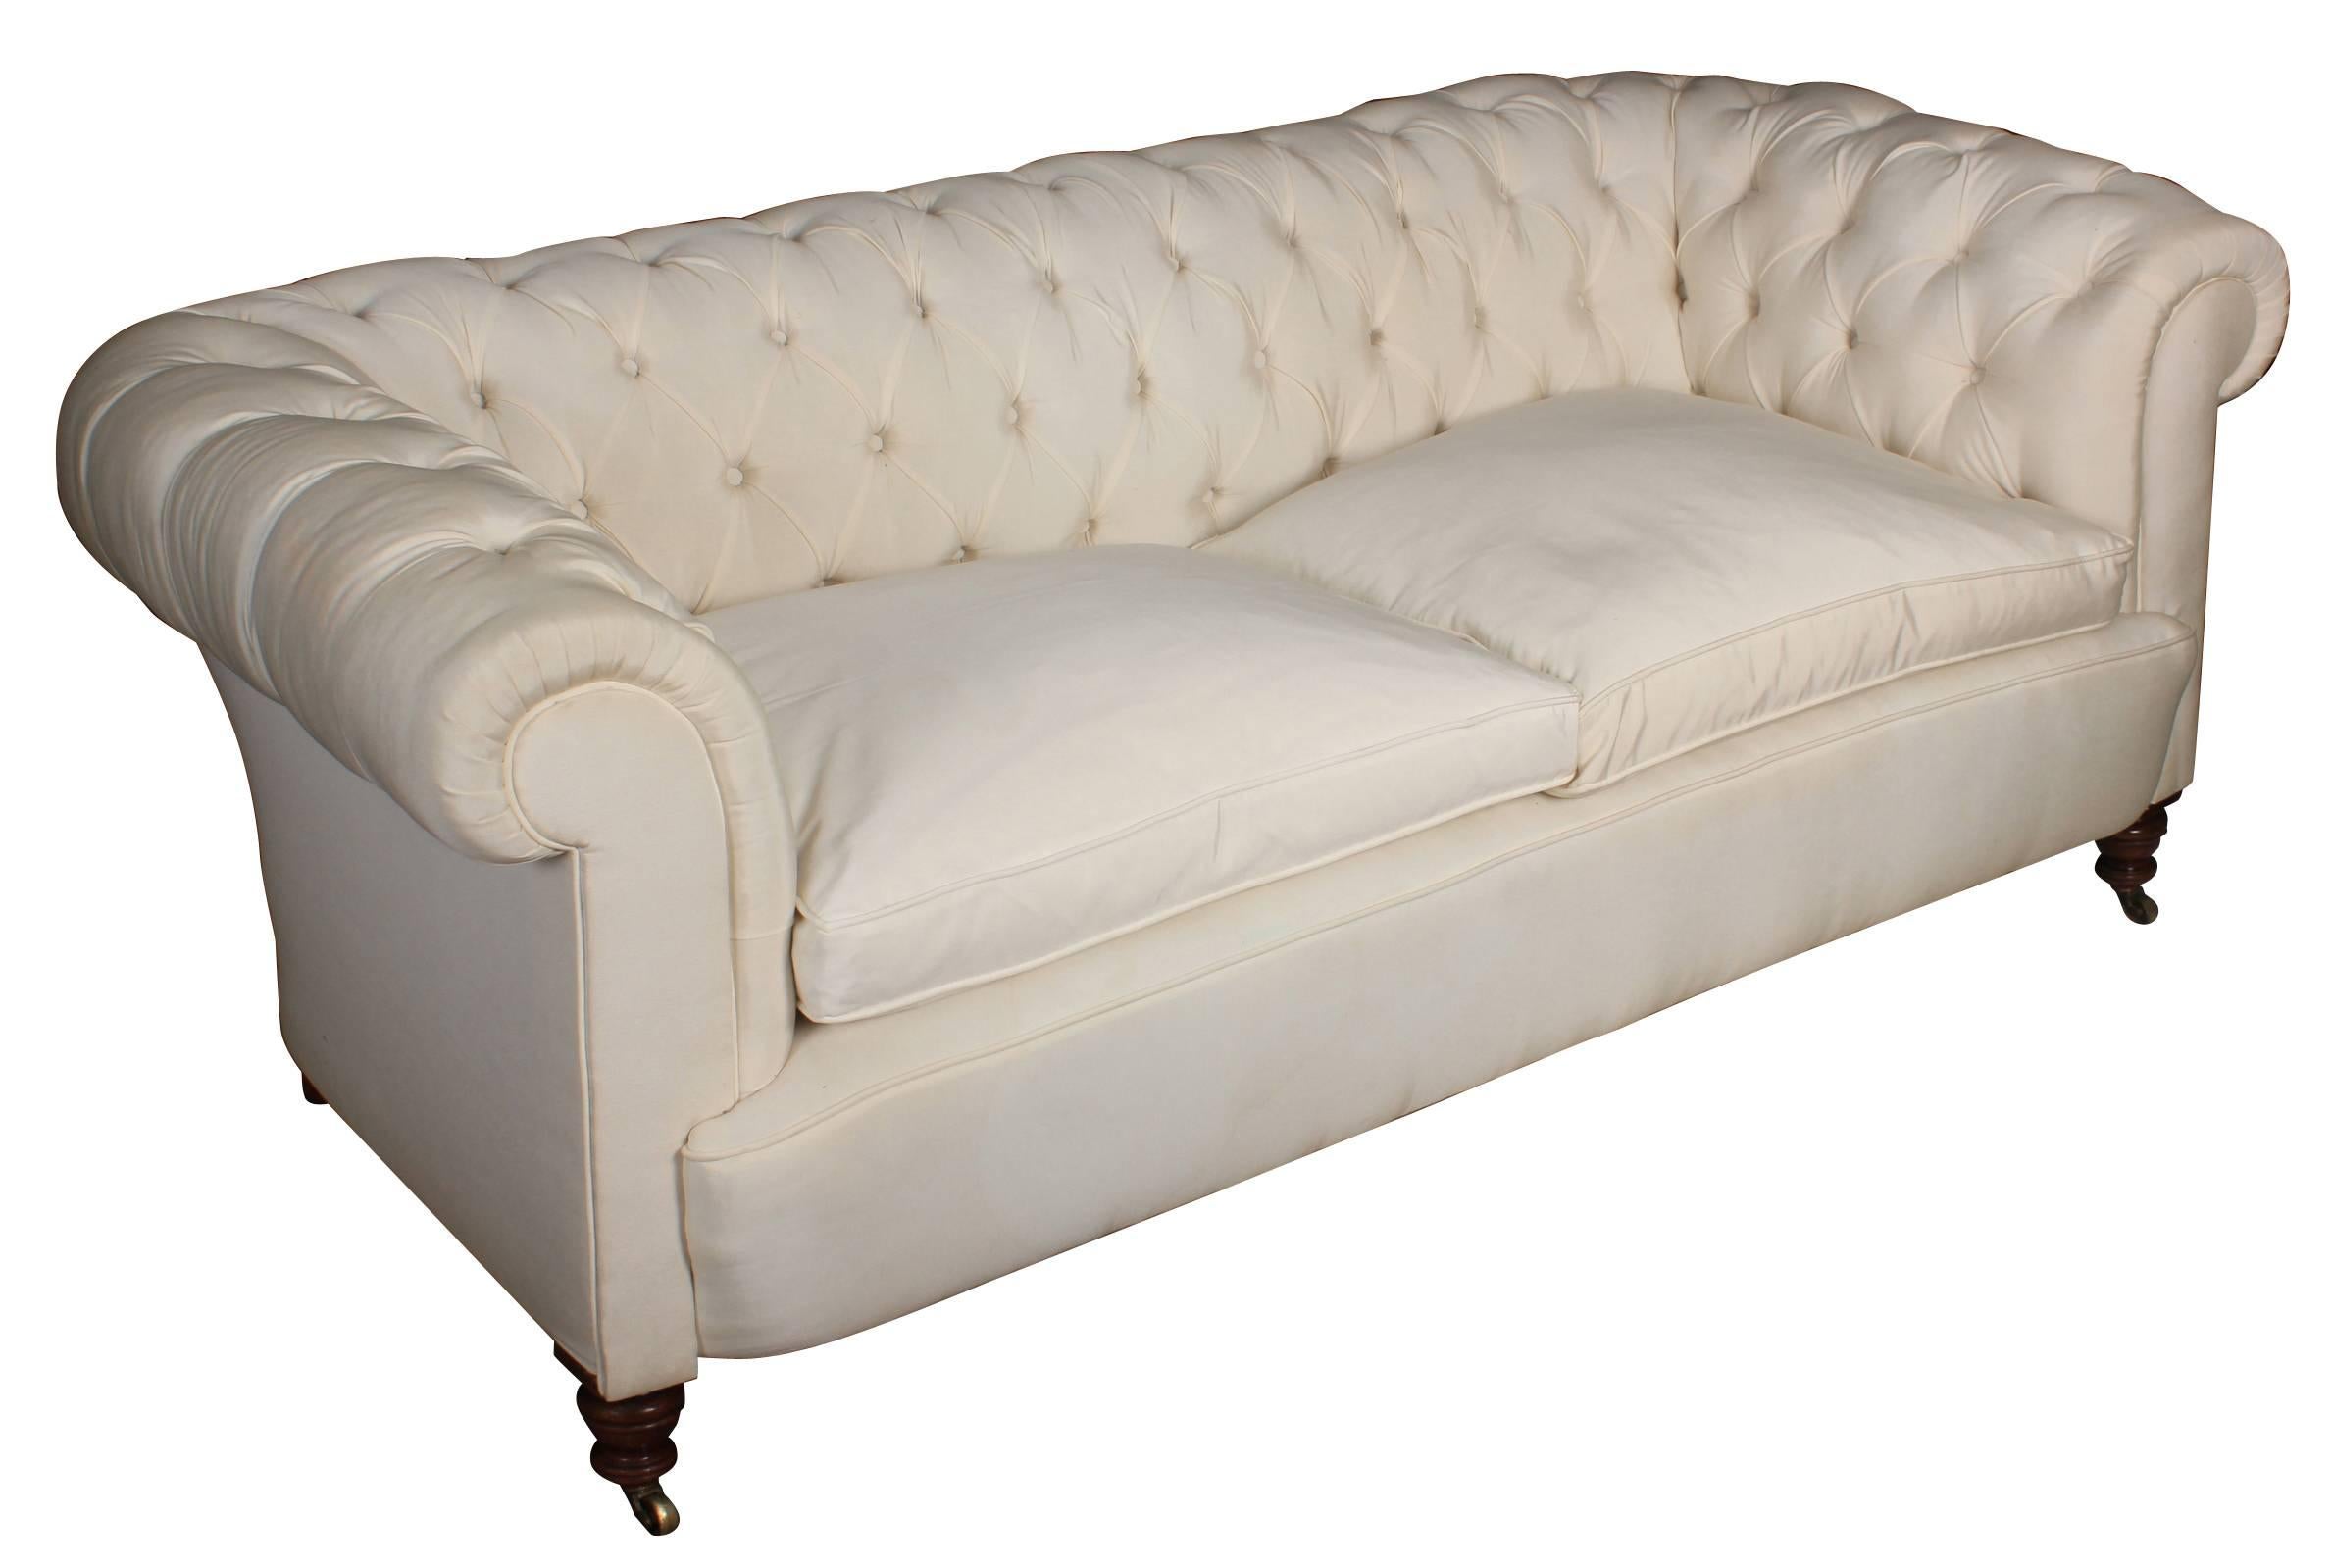 English, Circa 1850.
A lovely Victorian chesterfield sofa upholstered in a pale cream silky fabric, with deep buttoned back and arms and loose seat cushions.
On fantastic turned mahogany legs with brass casters.

L 205cm/80.5